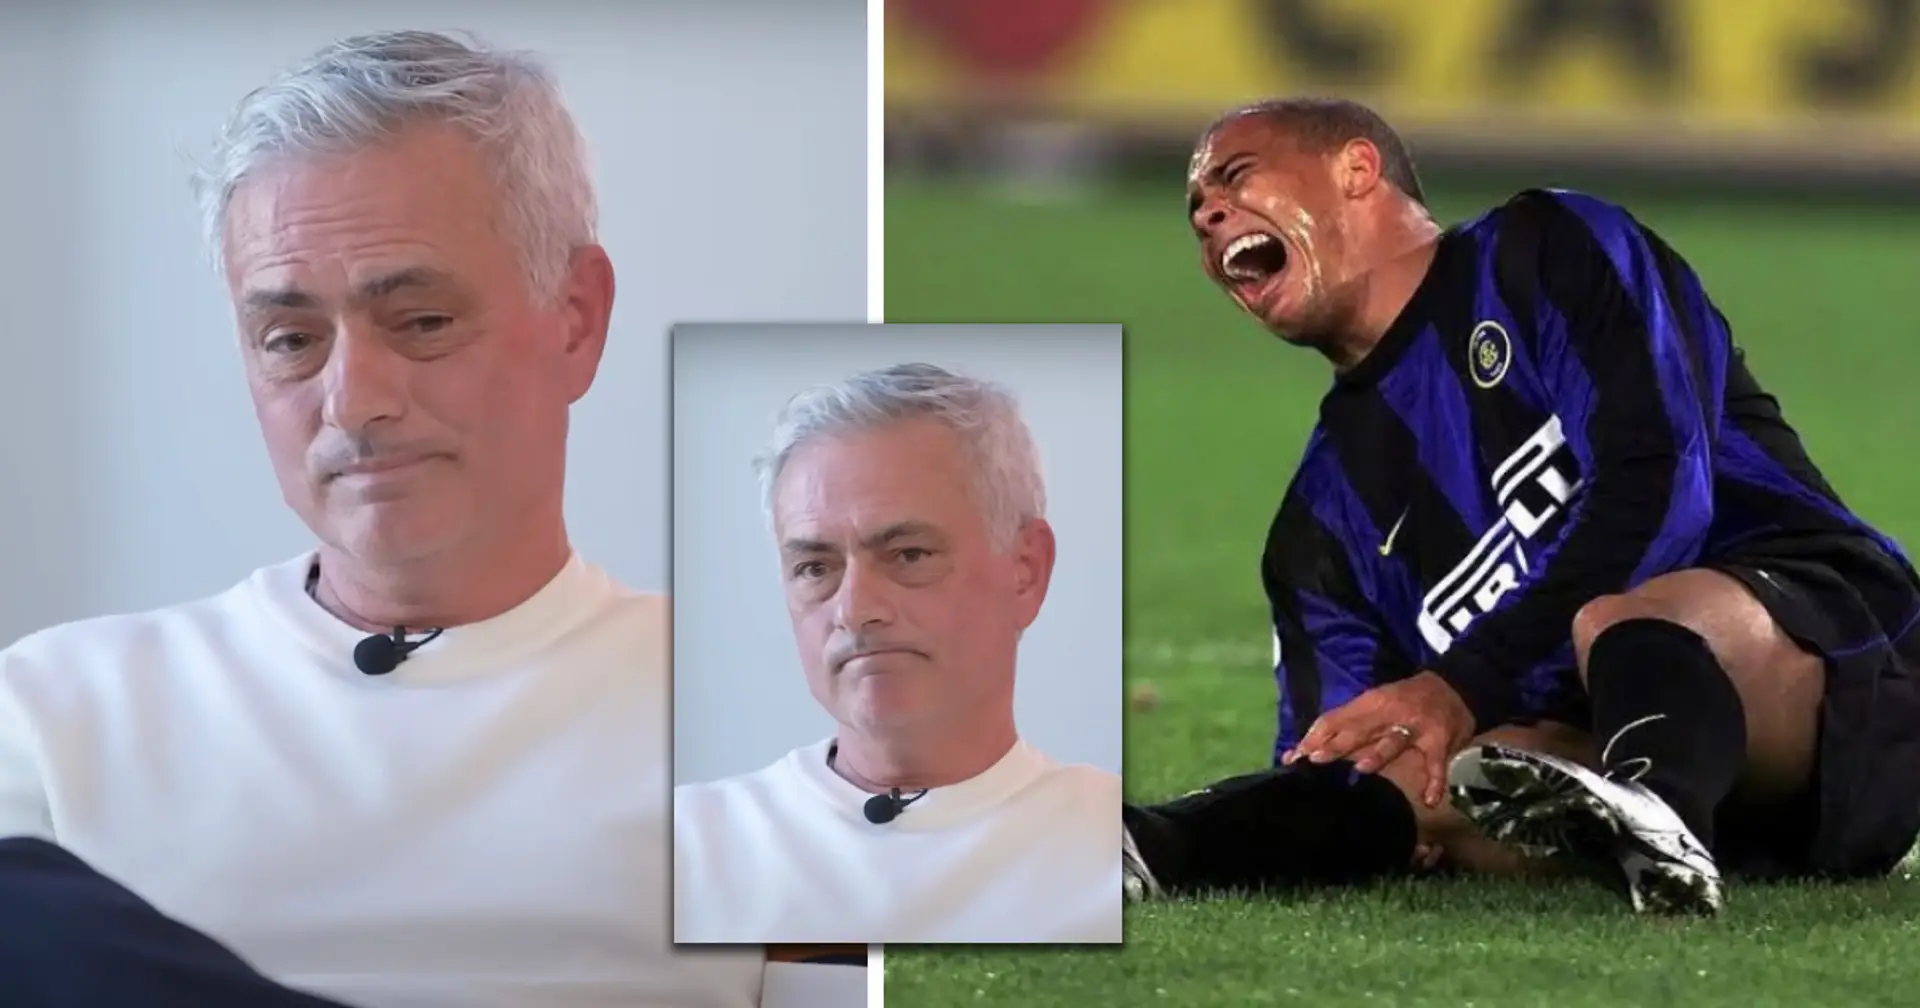 'The patellar tendon': Mourinho on Ronaldo's injuries and how good he could be without them